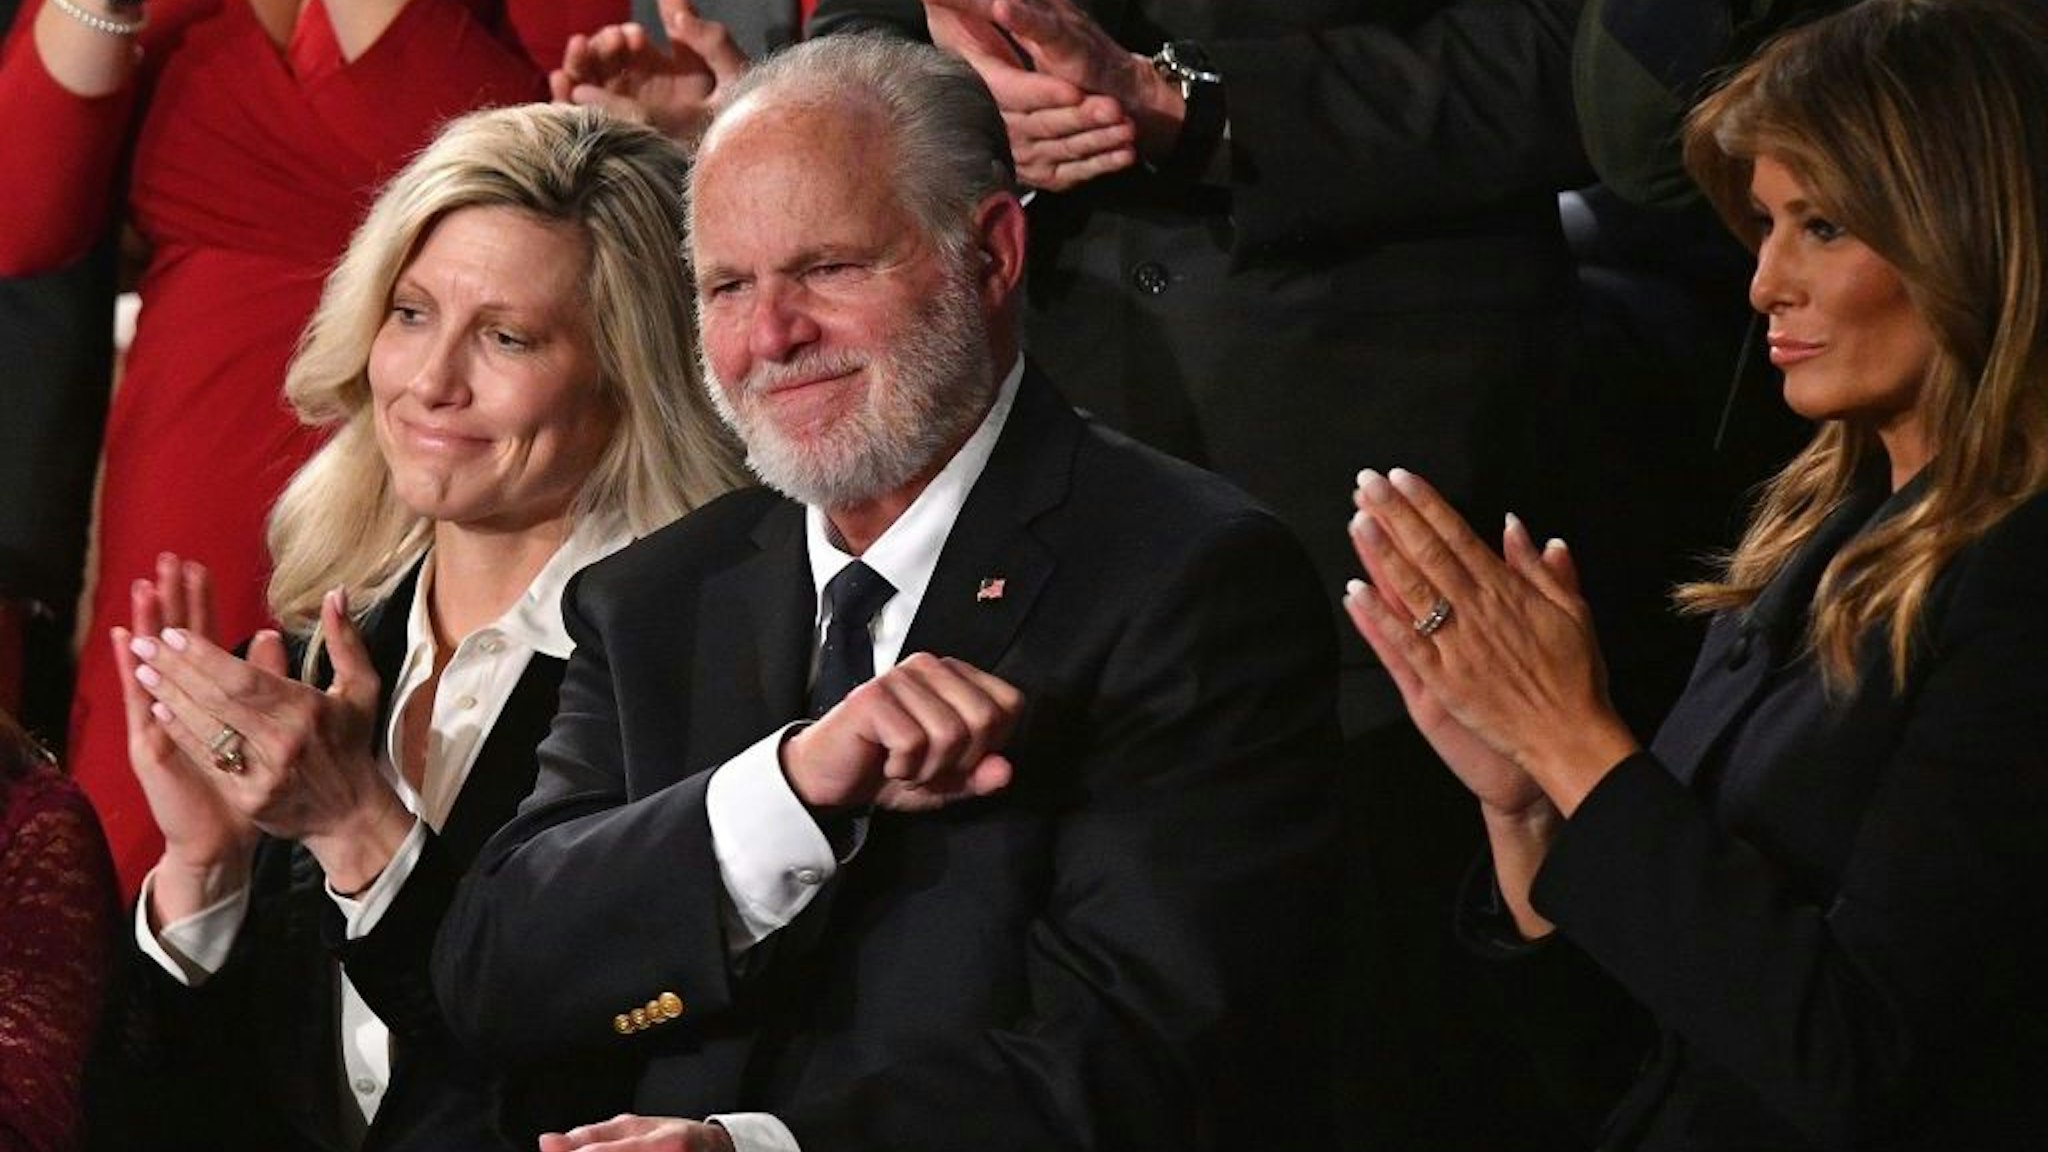 Radio personality Rush Limbaugh pumps his fist as he is acknowledged by US President Donald Trump as he delivers the State of the Union address at the US Capitol in Washington, DC, on February 4, 2020. (Photo by MANDEL NGAN / AFP) (Photo by MANDEL NGAN/AFP via Getty Images)